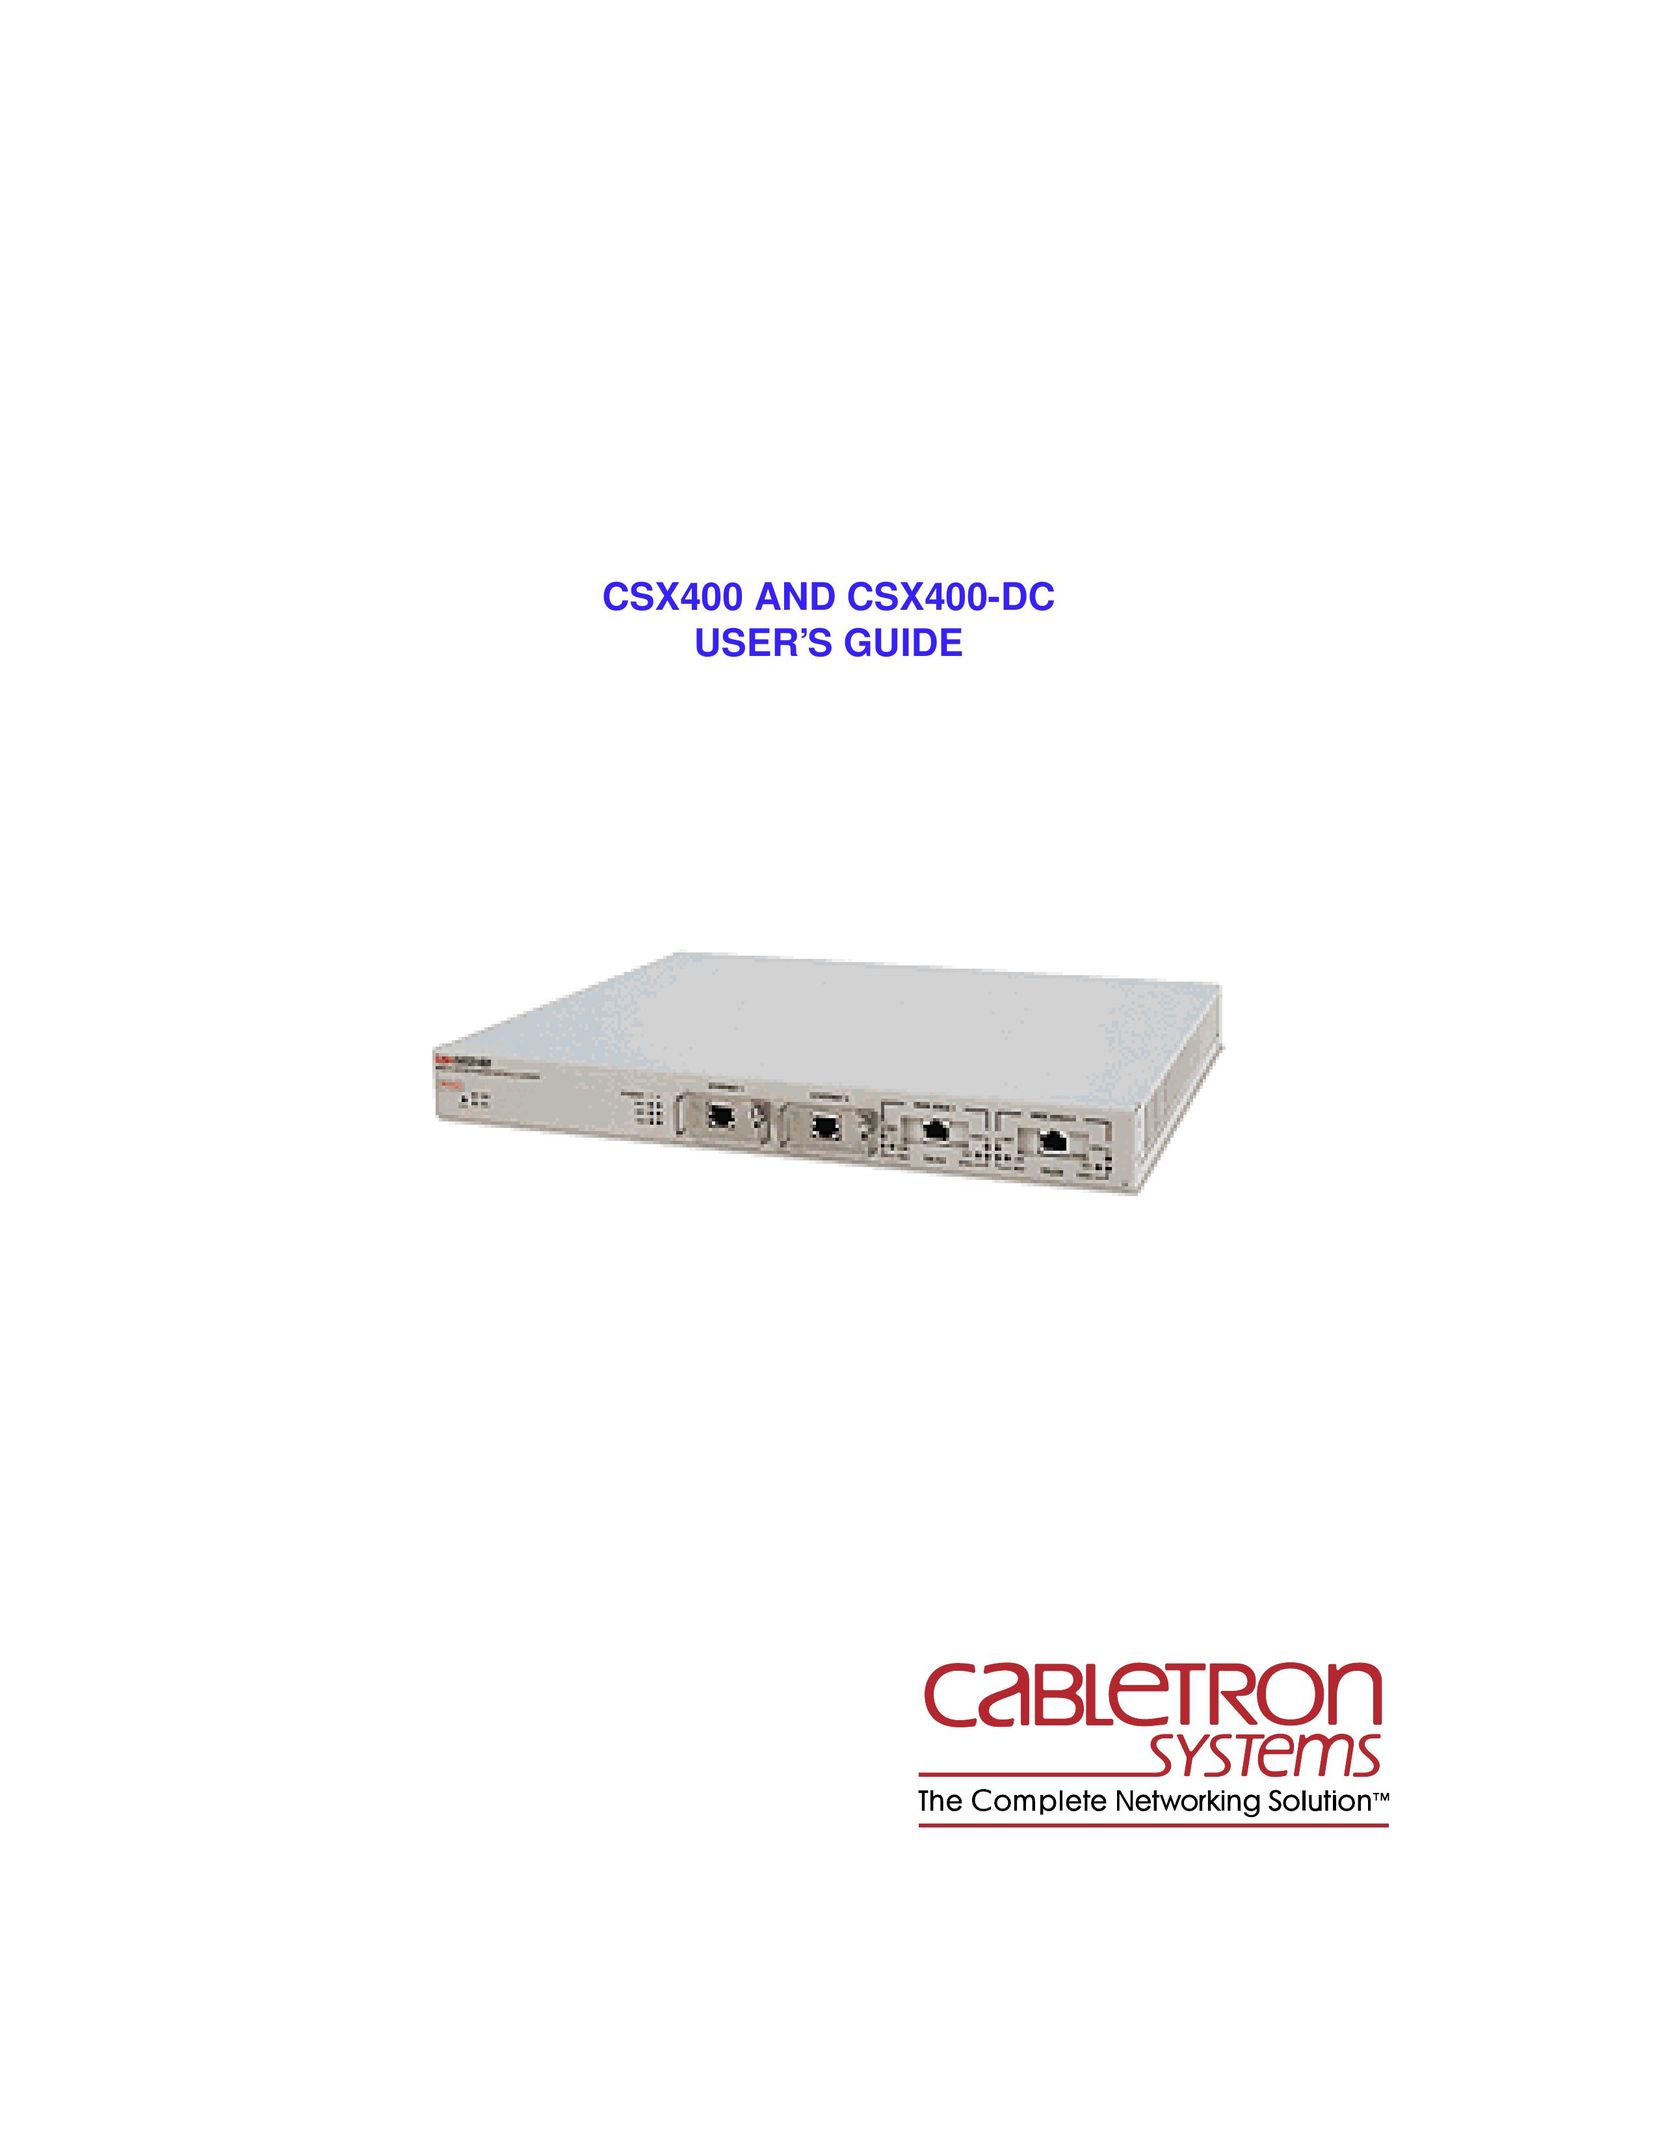 Cabletron Systems CSX400 Network Router User Manual